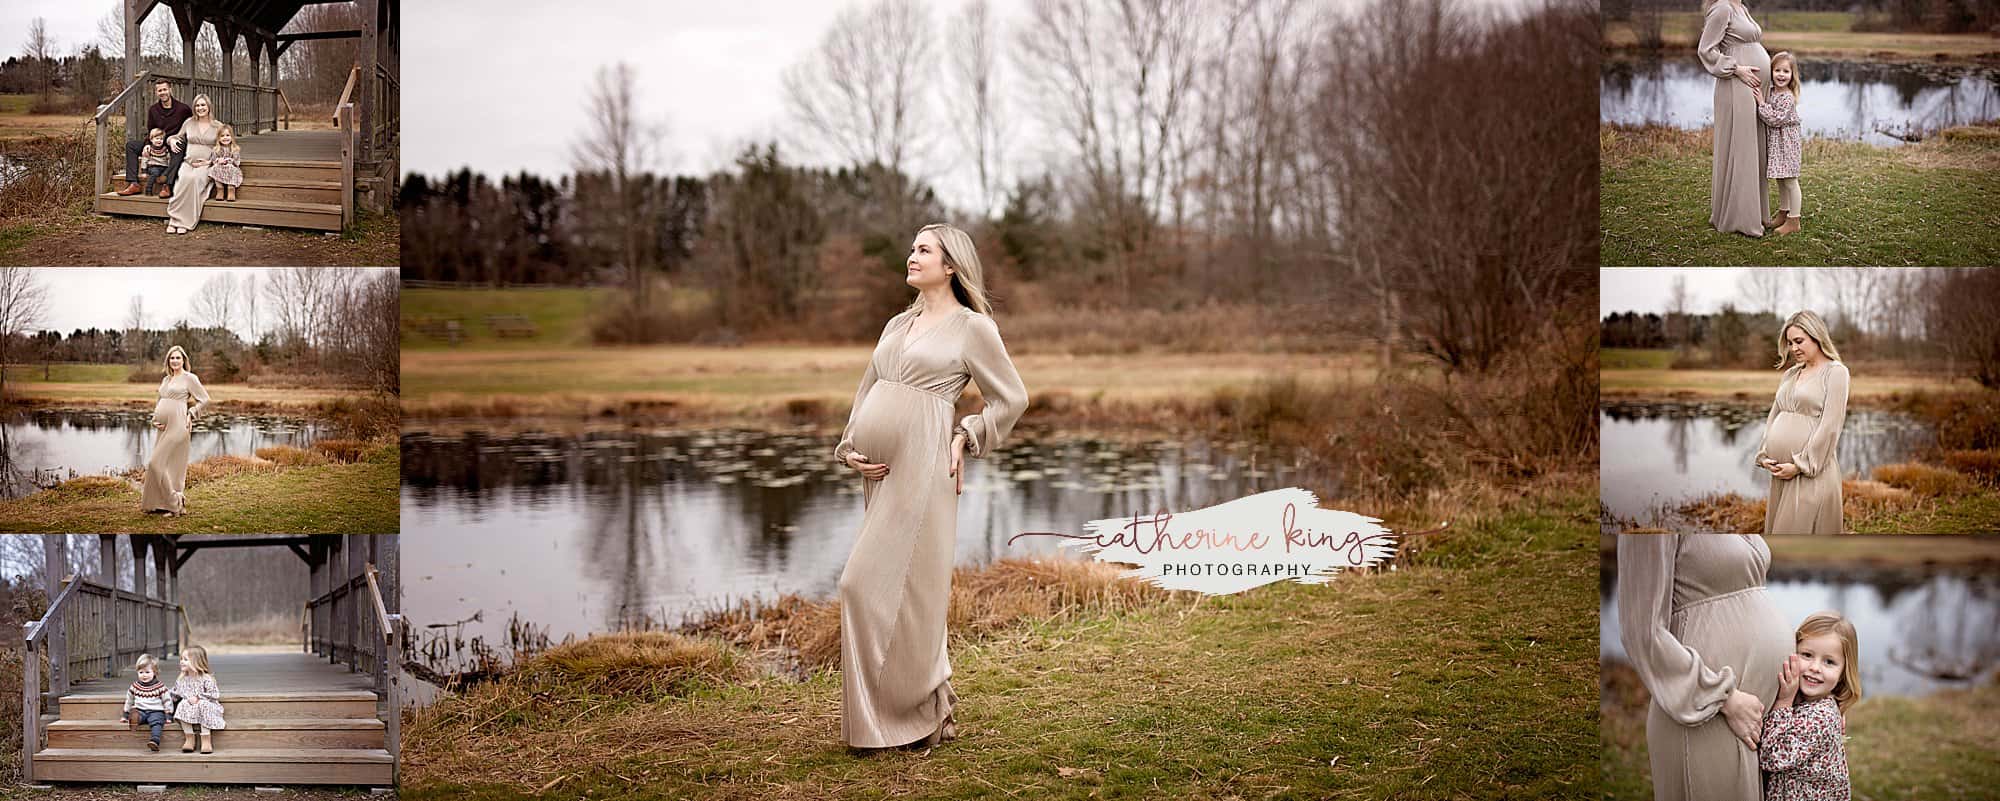 Quaker Hill CT Maternity Photographer - expecting baby number 3